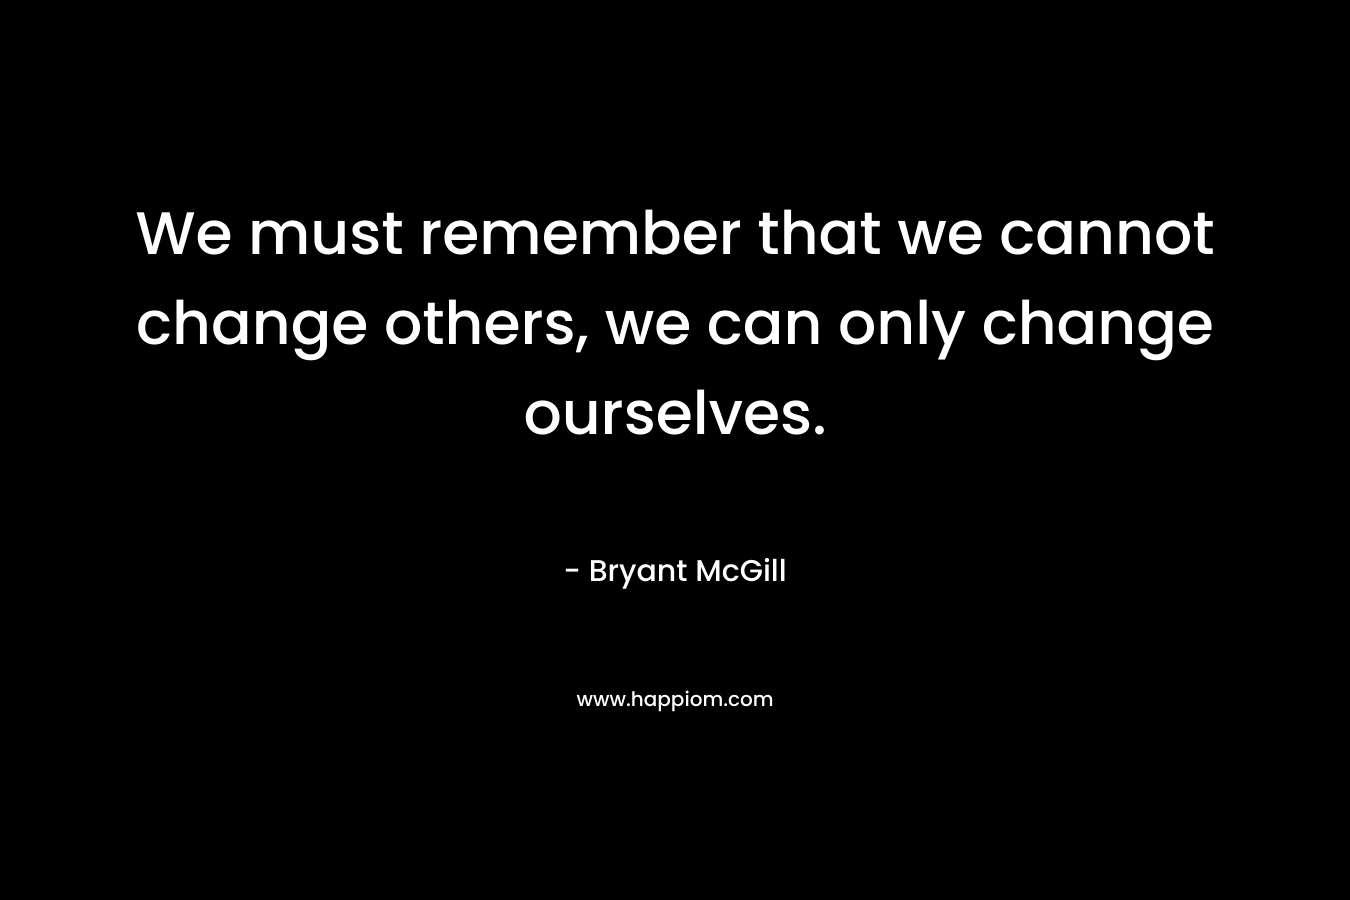 We must remember that we cannot change others, we can only change ourselves.